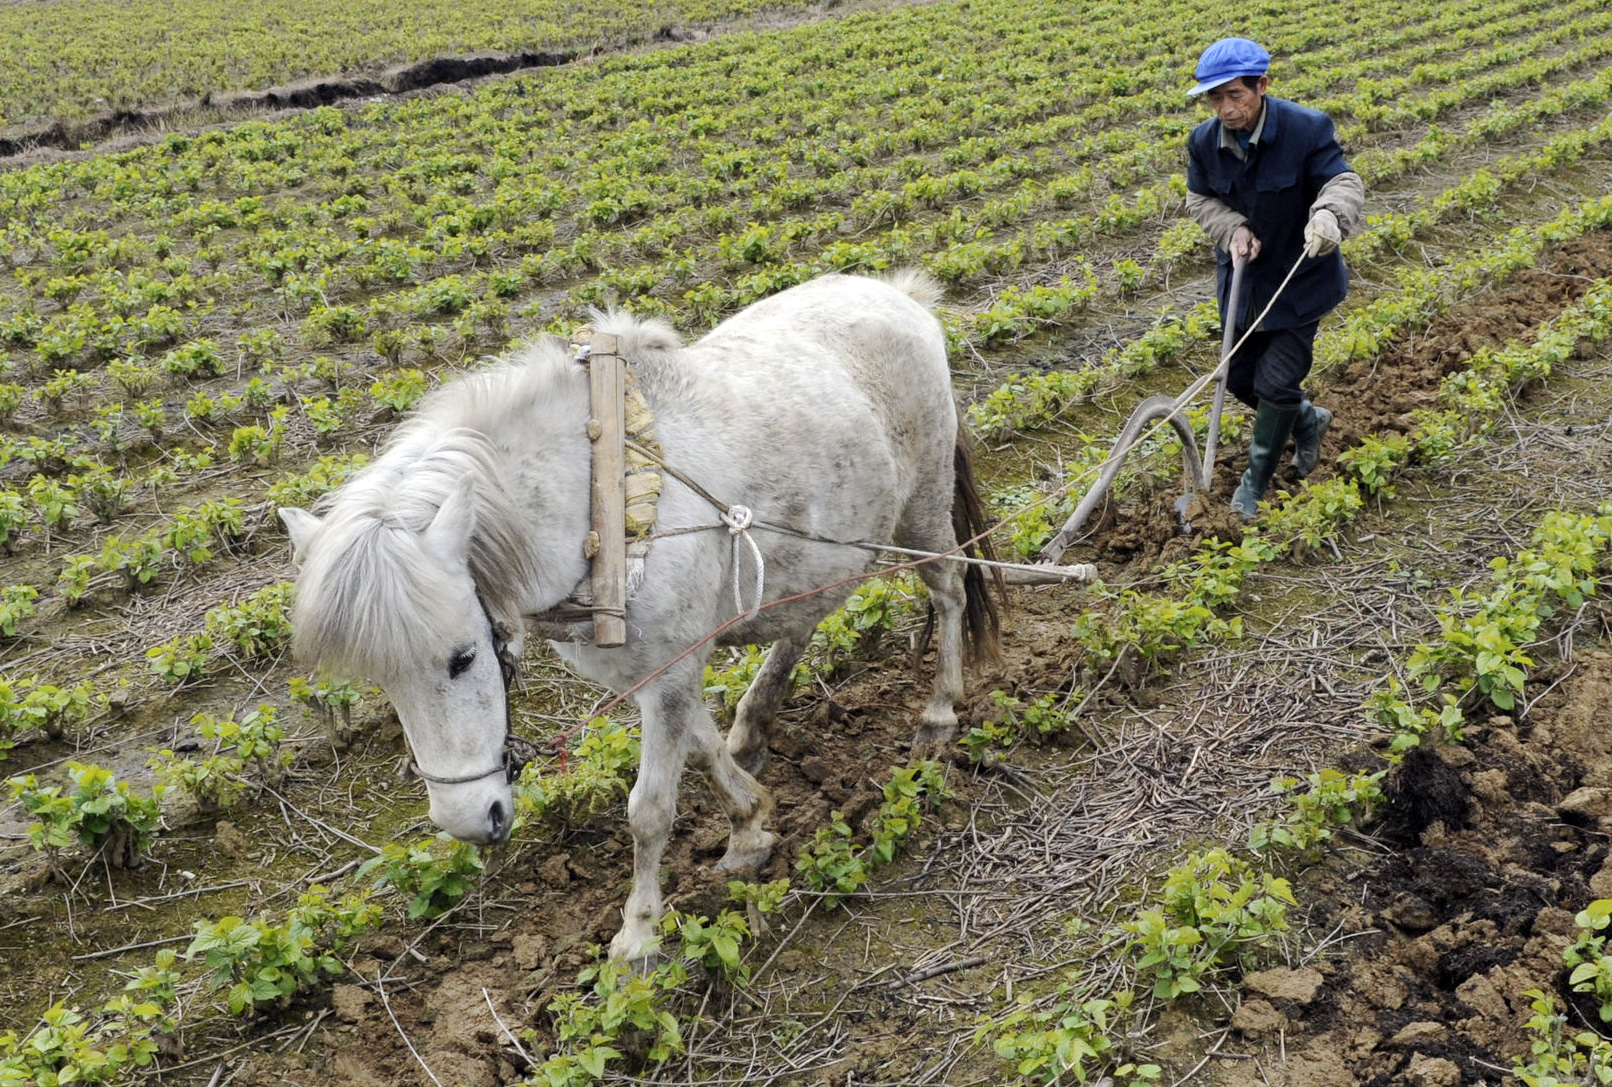 Long-awaited proposals for the reform and modernisation of agriculture in China are due to be discussed by policy officials next week. Photo: Xinhua
